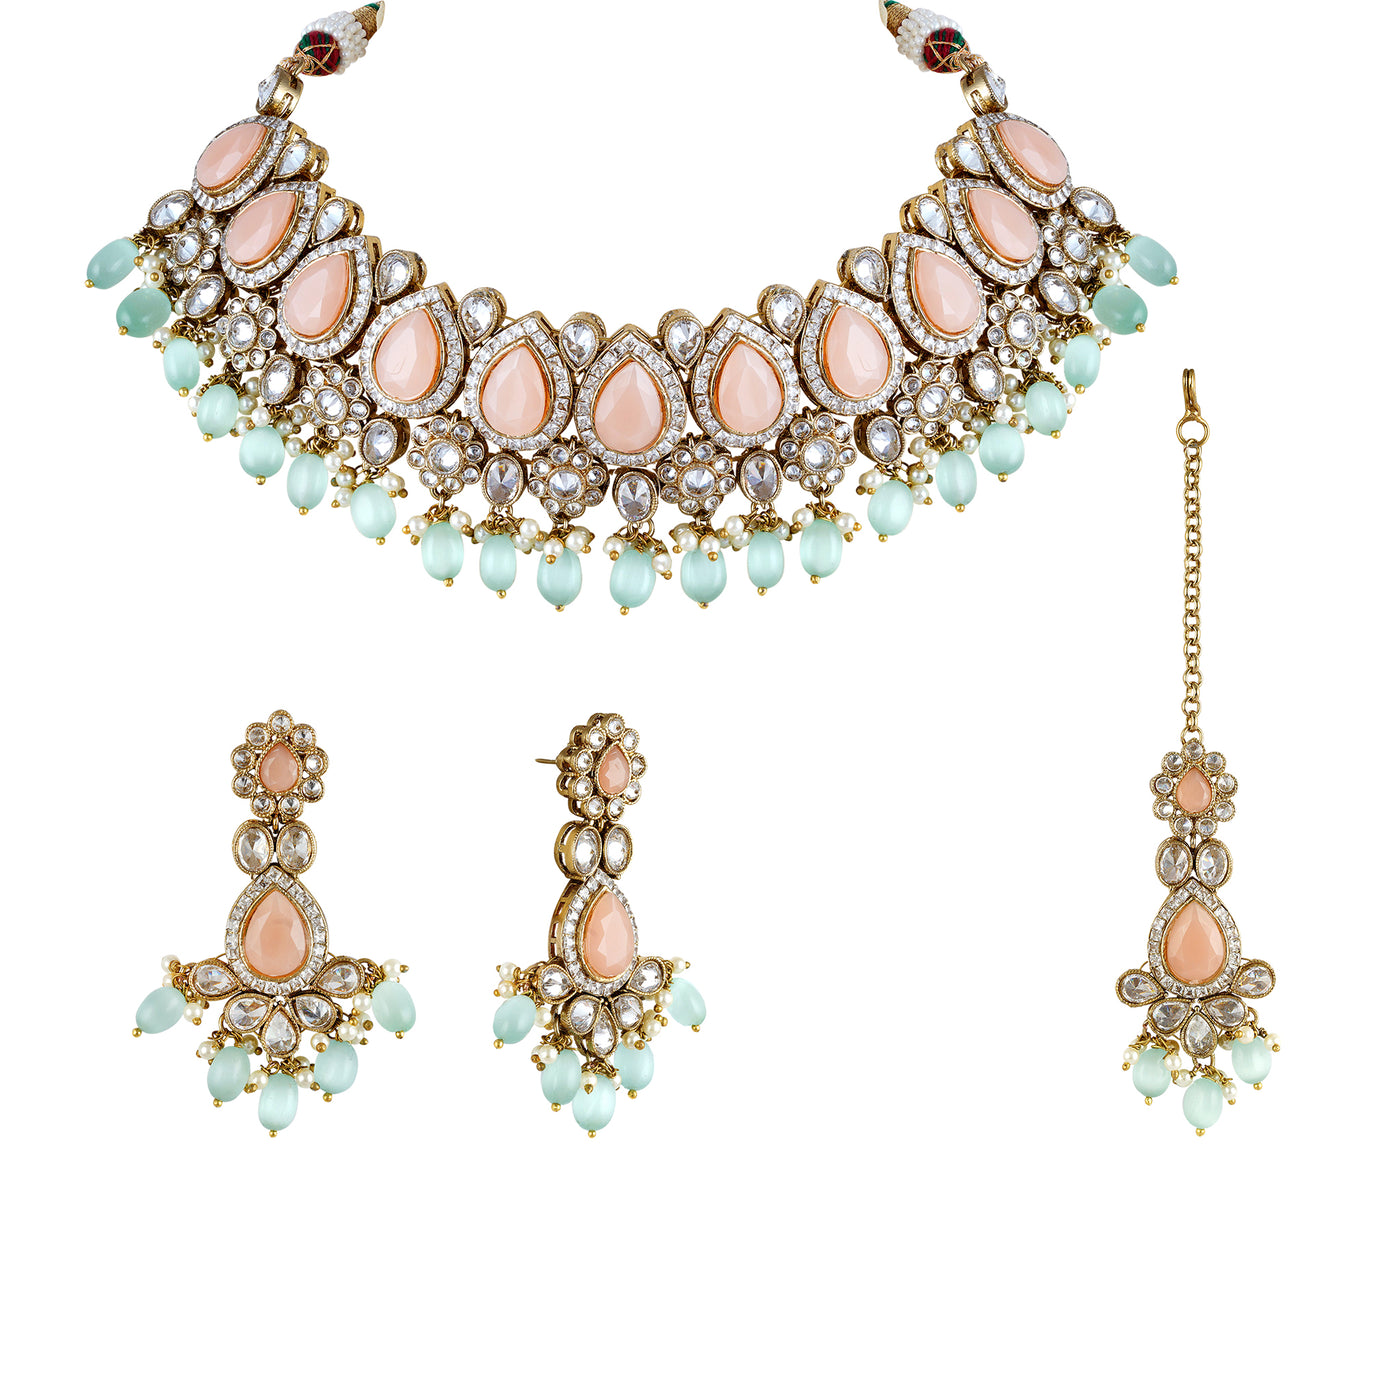 Polki Crystal choker necklace set with pink center and blue drops